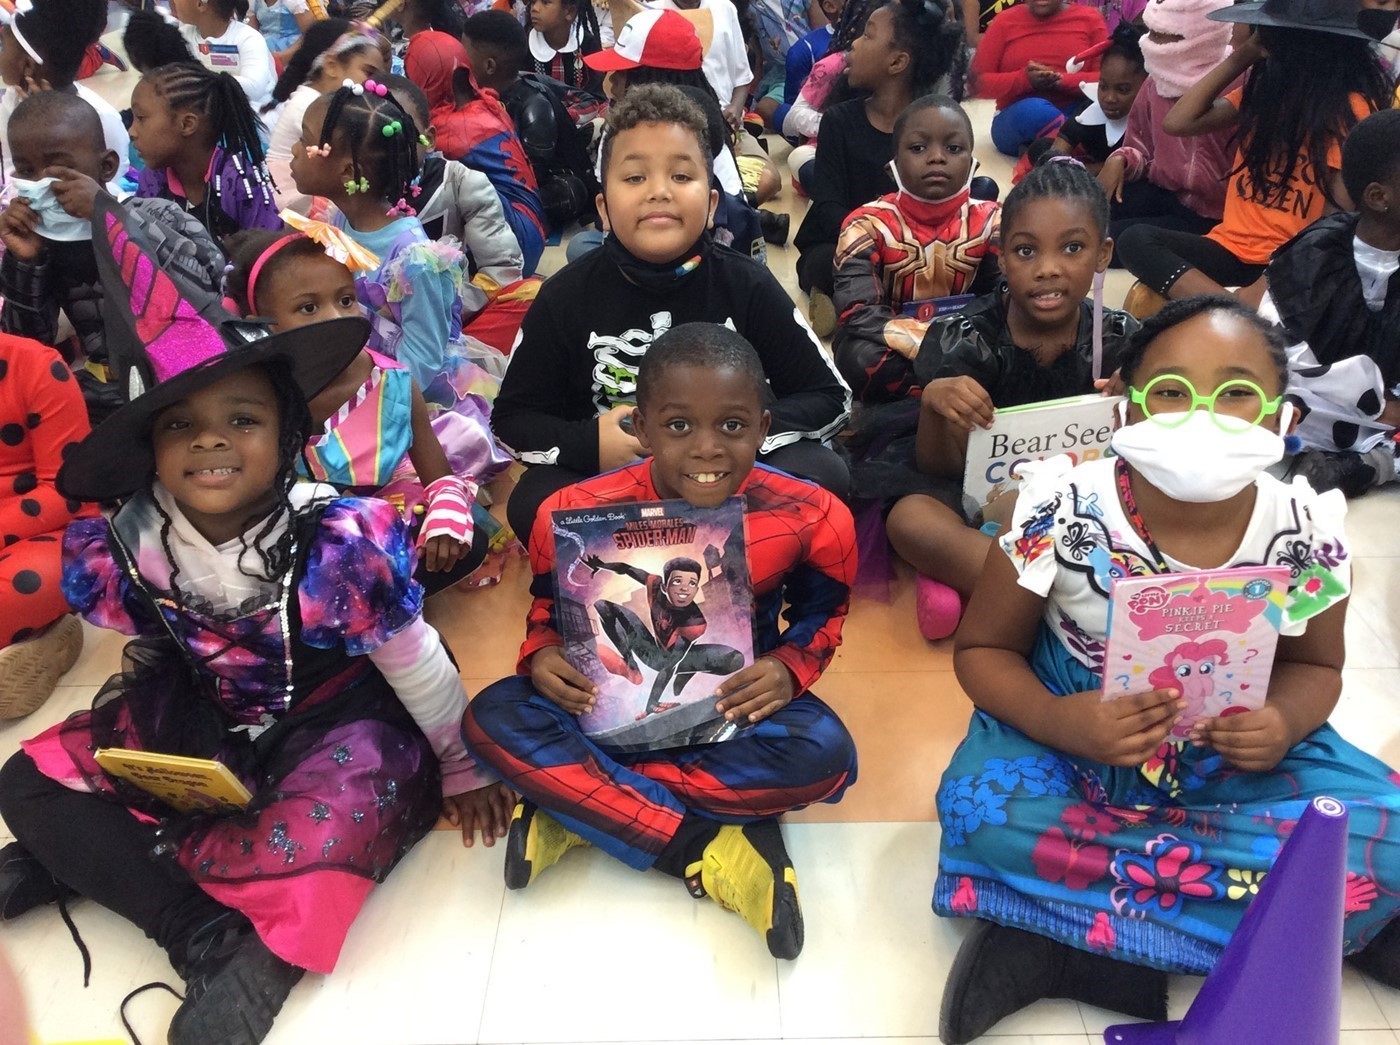 Students Dressed as Book Characters and Holding Books During a Book Character Parade